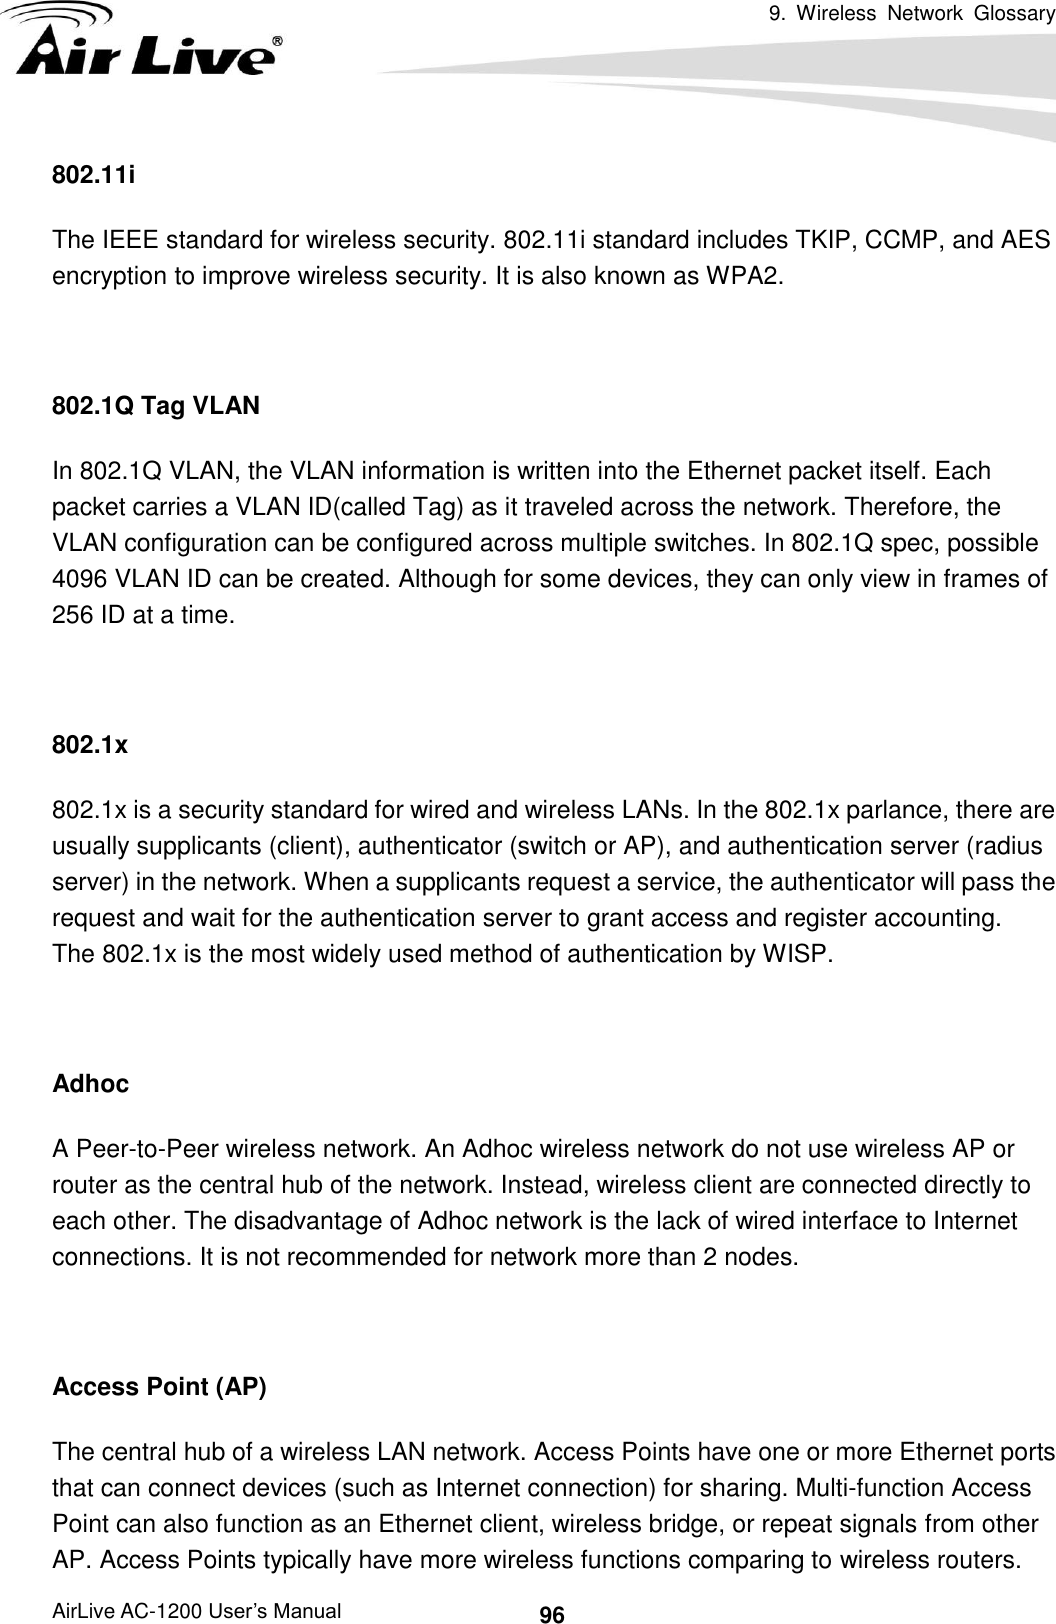 9.  Wireless  Network  Glossary      AirLive AC-1200 User’s Manual 96 802.11i The IEEE standard for wireless security. 802.11i standard includes TKIP, CCMP, and AES encryption to improve wireless security. It is also known as WPA2.  802.1Q Tag VLAN In 802.1Q VLAN, the VLAN information is written into the Ethernet packet itself. Each packet carries a VLAN ID(called Tag) as it traveled across the network. Therefore, the VLAN configuration can be configured across multiple switches. In 802.1Q spec, possible 4096 VLAN ID can be created. Although for some devices, they can only view in frames of 256 ID at a time.  802.1x 802.1x is a security standard for wired and wireless LANs. In the 802.1x parlance, there are usually supplicants (client), authenticator (switch or AP), and authentication server (radius server) in the network. When a supplicants request a service, the authenticator will pass the request and wait for the authentication server to grant access and register accounting.   The 802.1x is the most widely used method of authentication by WISP.  Adhoc A Peer-to-Peer wireless network. An Adhoc wireless network do not use wireless AP or router as the central hub of the network. Instead, wireless client are connected directly to each other. The disadvantage of Adhoc network is the lack of wired interface to Internet connections. It is not recommended for network more than 2 nodes.  Access Point (AP) The central hub of a wireless LAN network. Access Points have one or more Ethernet ports that can connect devices (such as Internet connection) for sharing. Multi-function Access Point can also function as an Ethernet client, wireless bridge, or repeat signals from other AP. Access Points typically have more wireless functions comparing to wireless routers. 